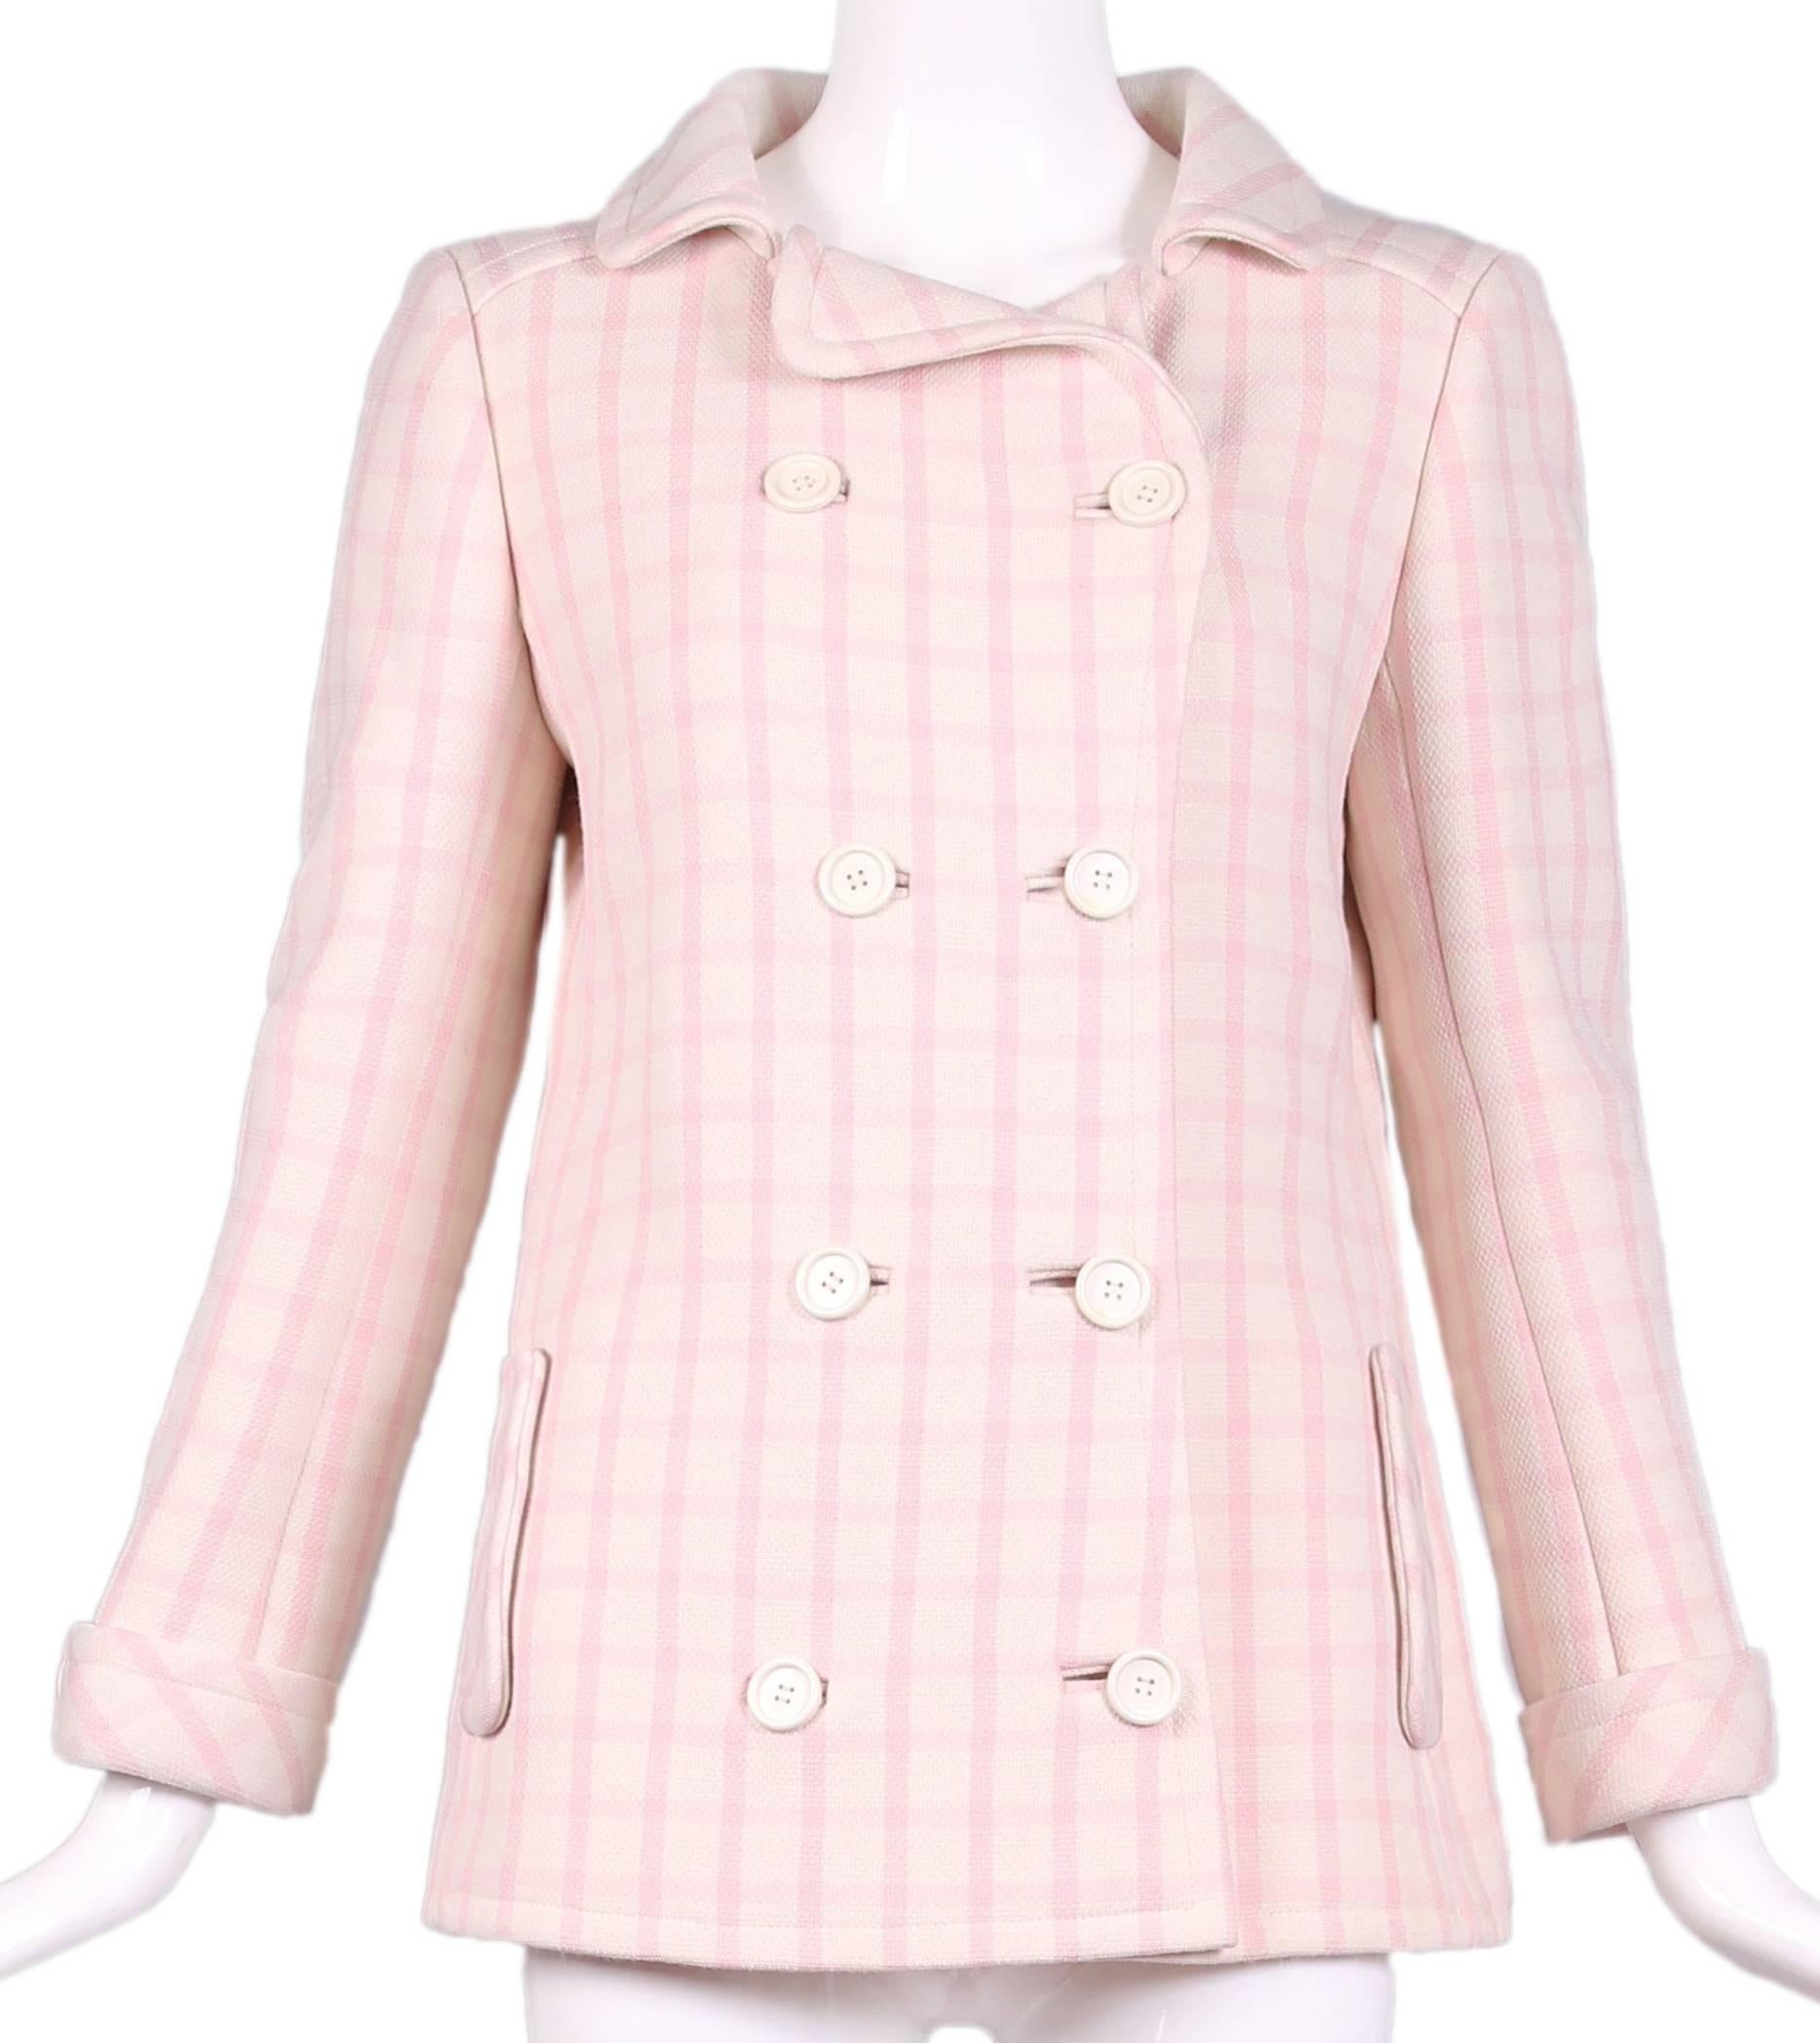 A 1968 Andre Courrèges for Harrods pink and white checked wool double-breasted jacket with rear belt. Contains two side pockets with flaps and lined entirely in white rayon. In excellent condition with a few yellow spots at the interior lining. No